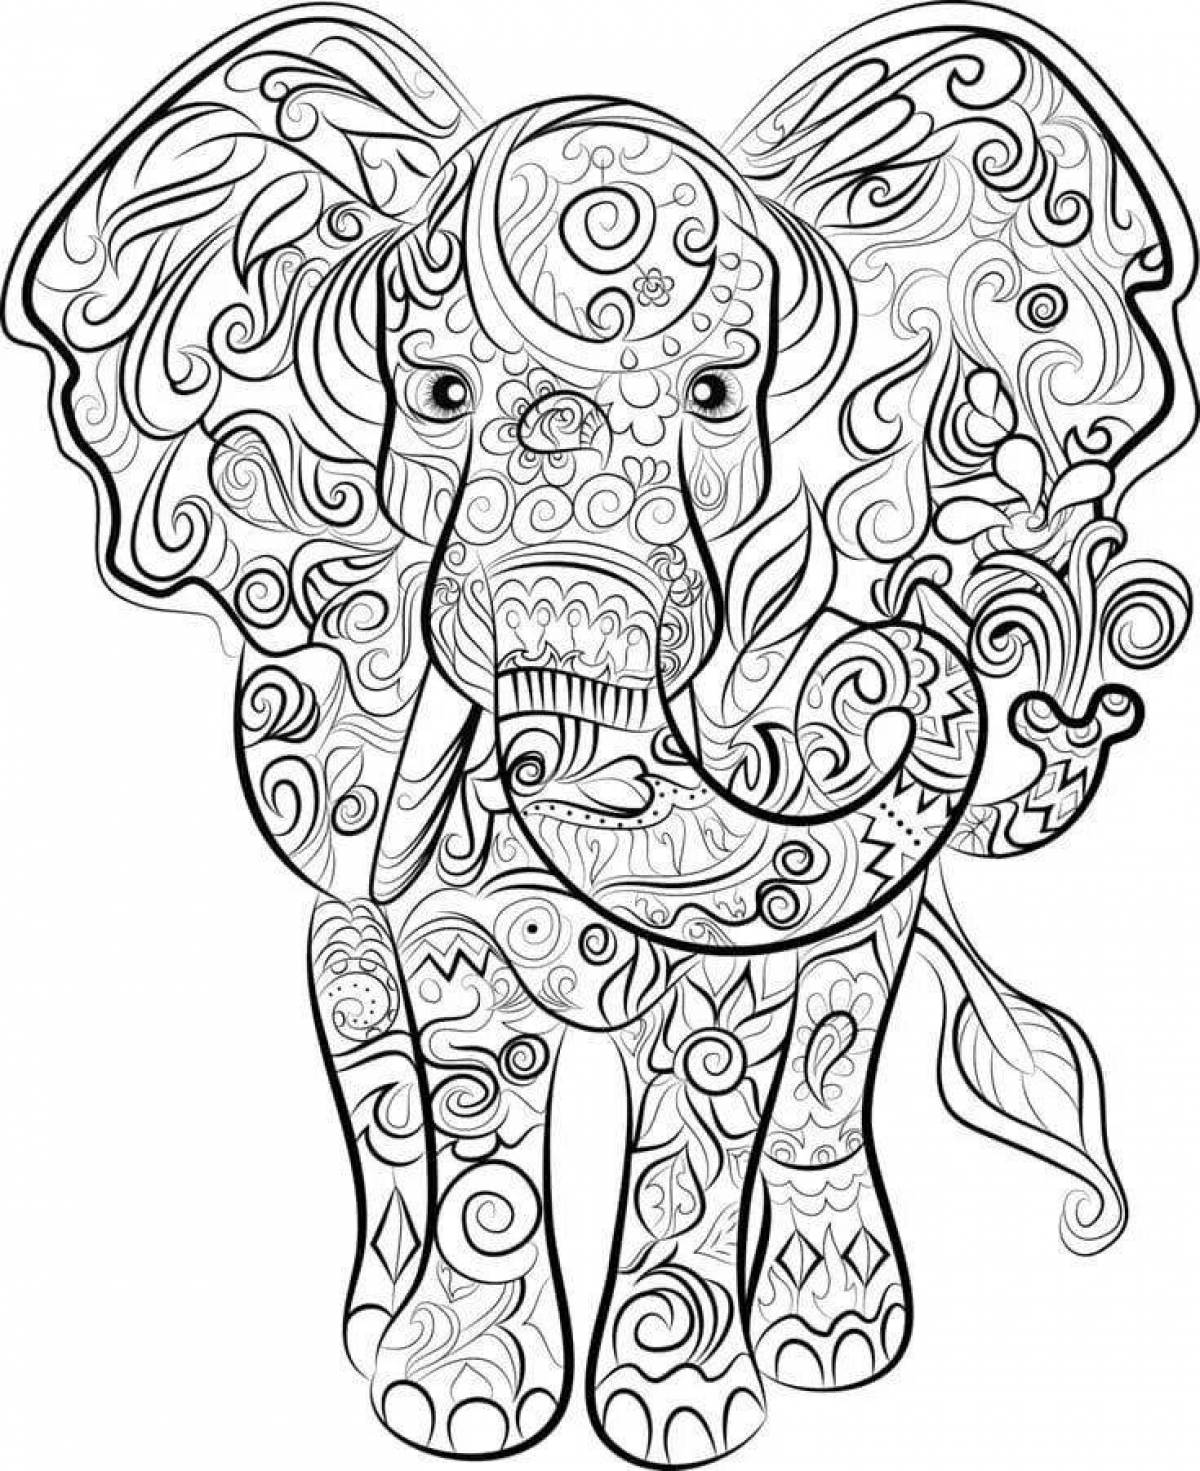 Amazing animal coloring page with pattern